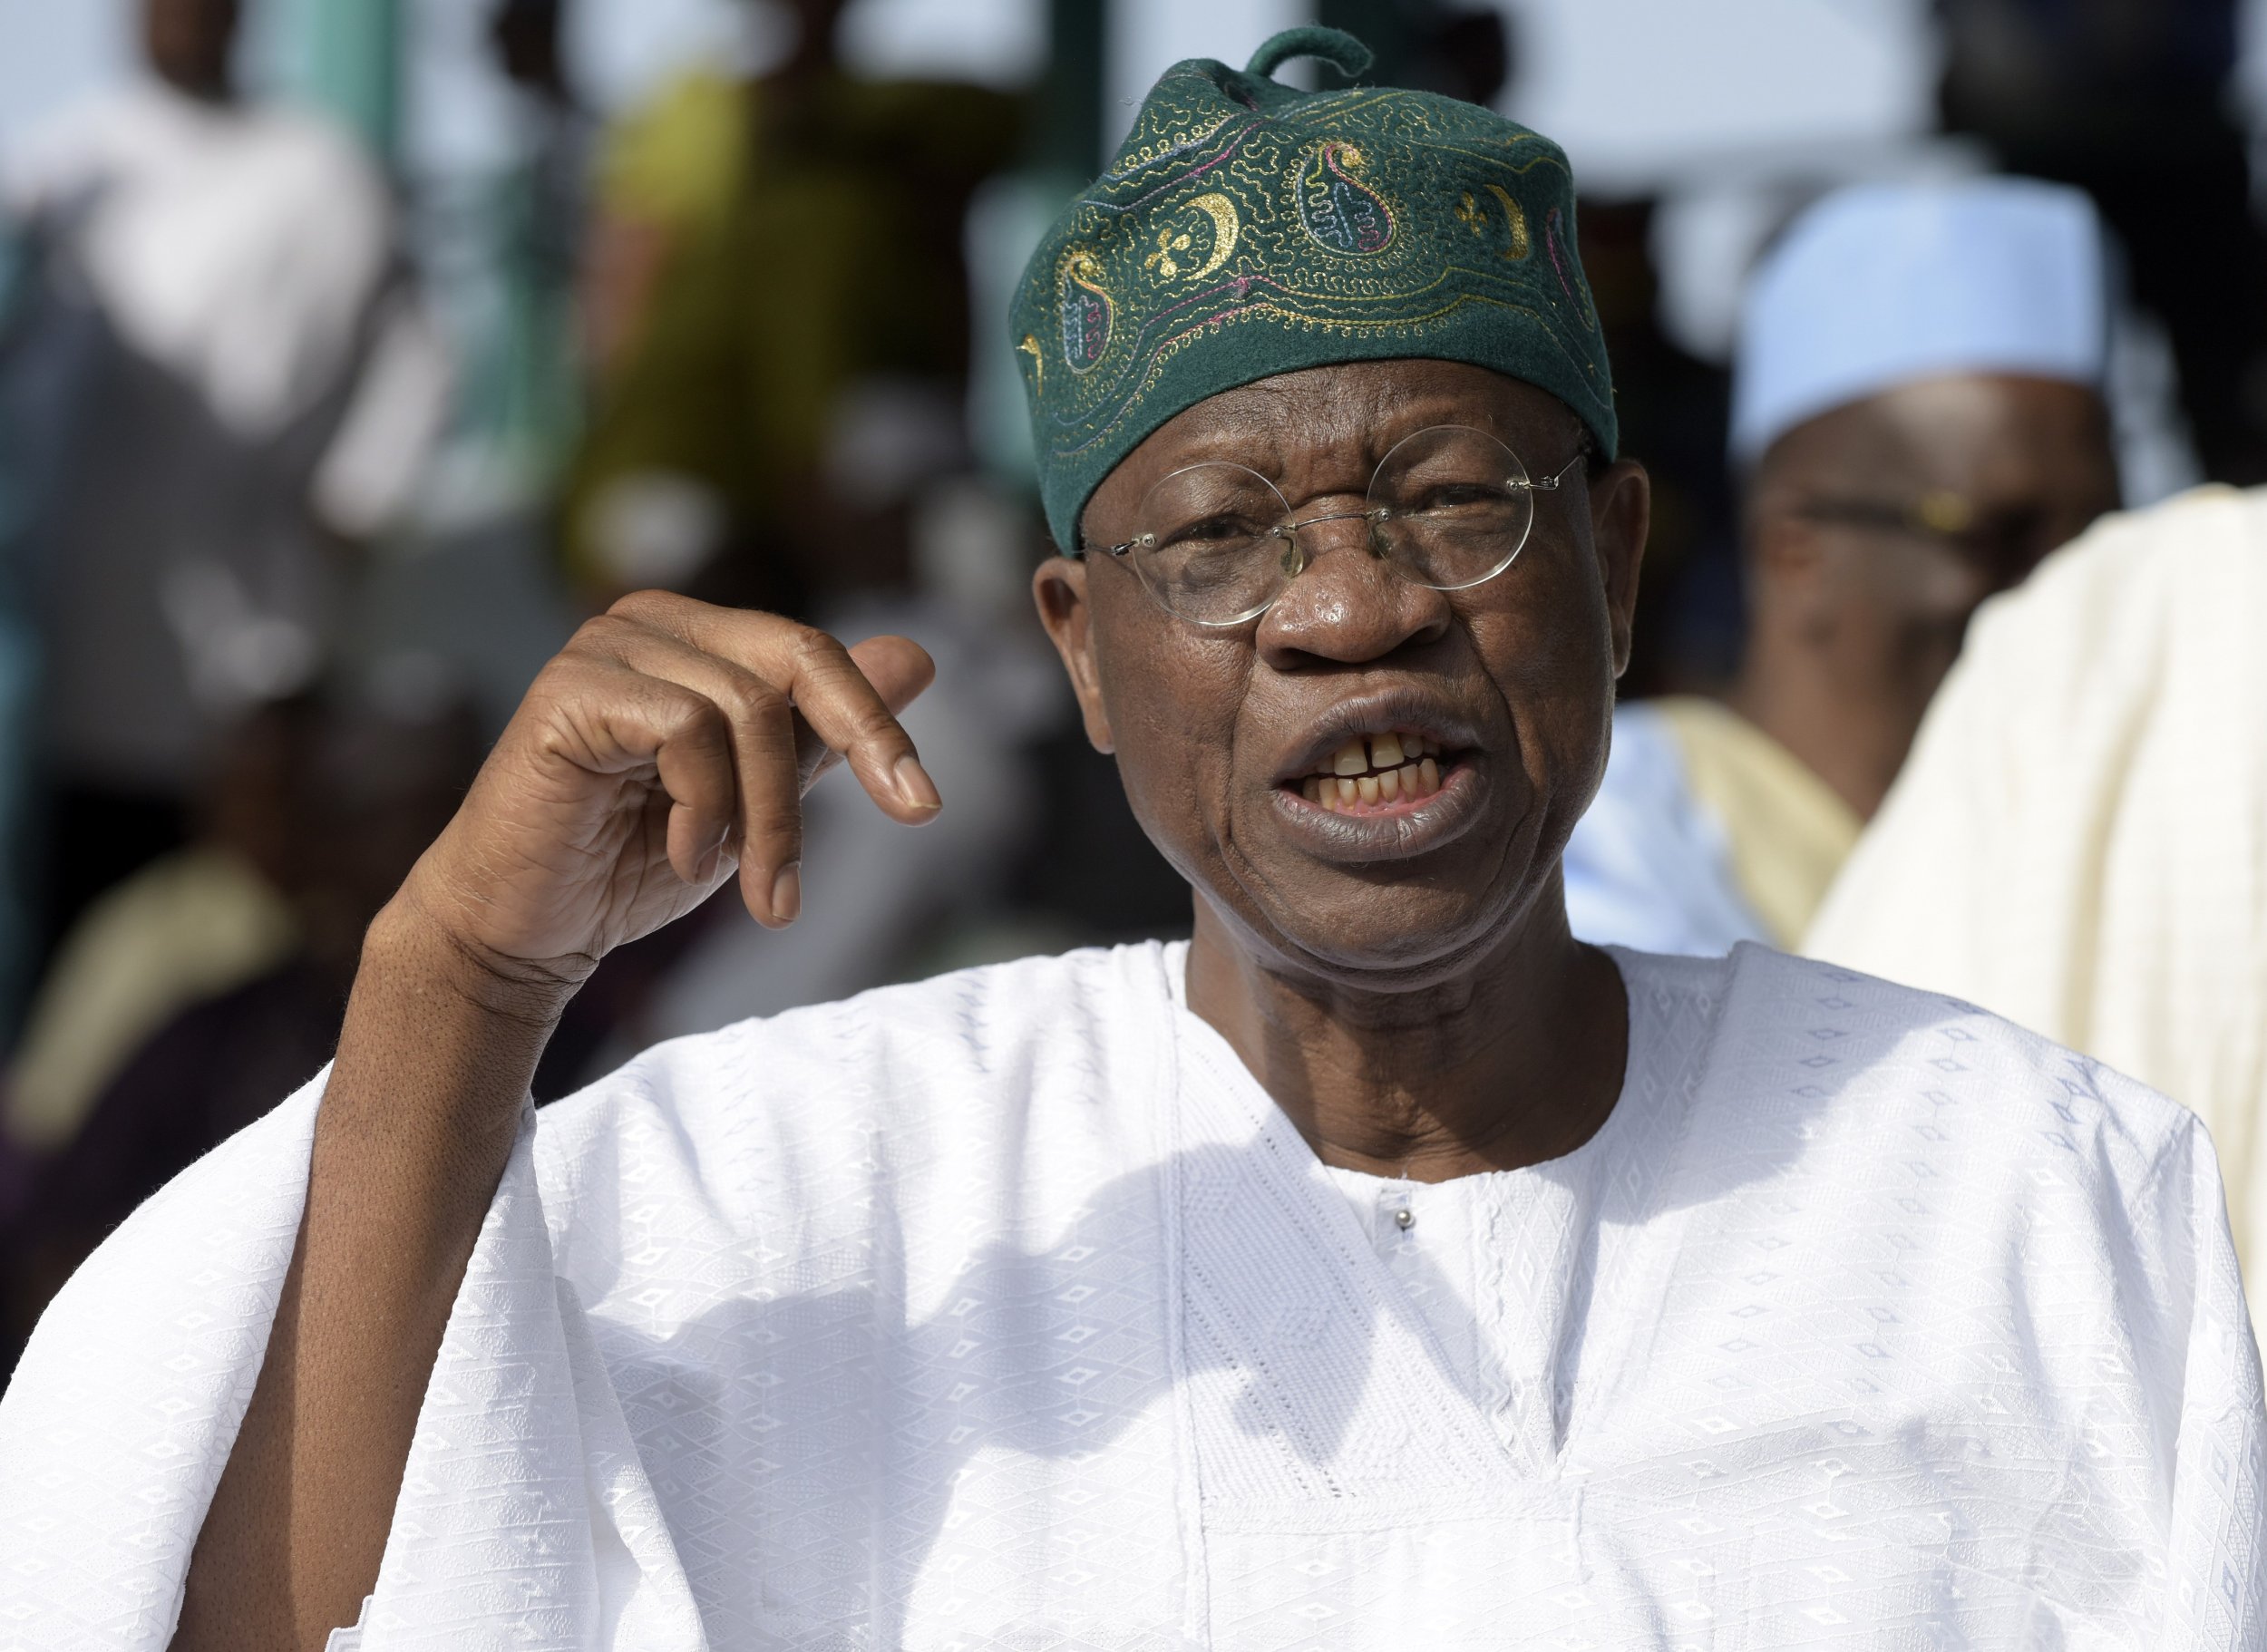 NYSC Has Increased COVID-19 Cases In Nigeria – Lai Mohammed